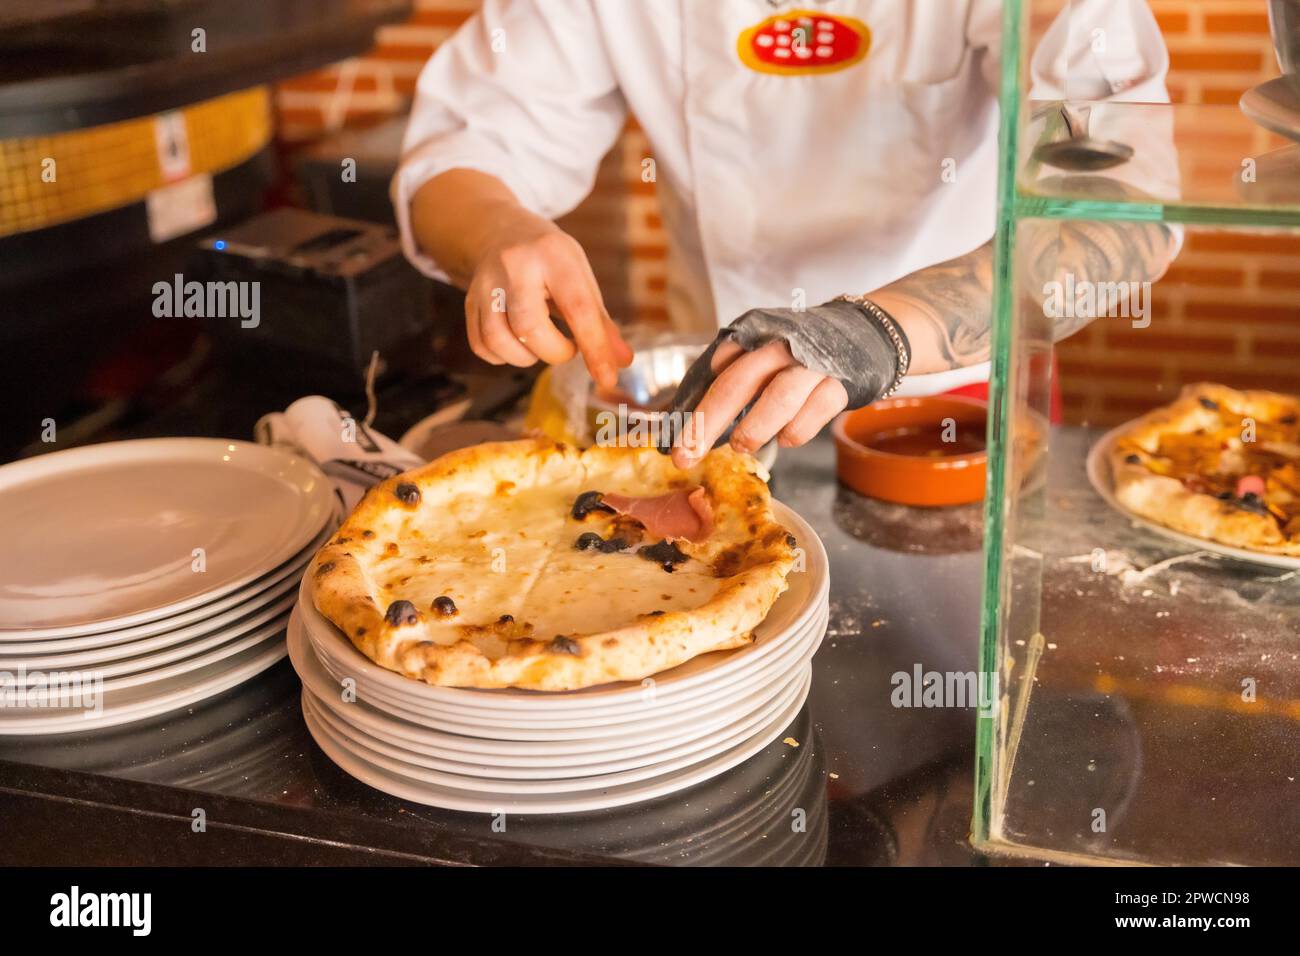 Artisan pizza oven. Chef preparing the pizza to sell it, pizza hot and ready for customers Stock Photo